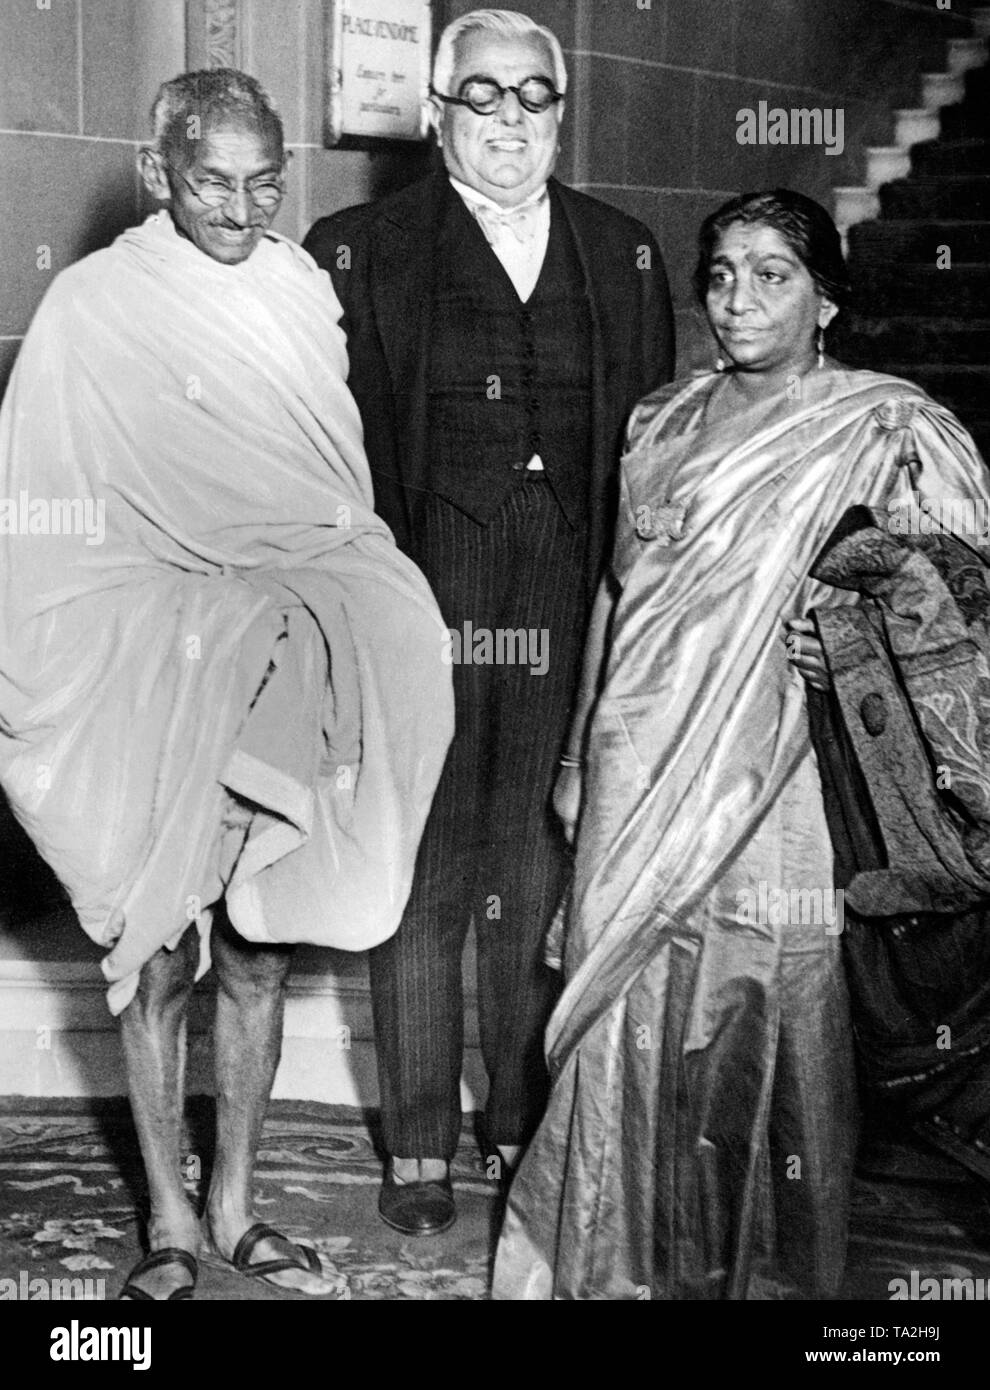 The leader of the Indian nationalist movement Mahatma Gandhi (left) and the leader of the Indian Muslims, Aga Khan, one of the richest princes of India. Right beside, the Indian poetess and politician Sarojini Naidui. The purpose of the meeting is the India Conference in London. Stock Photo